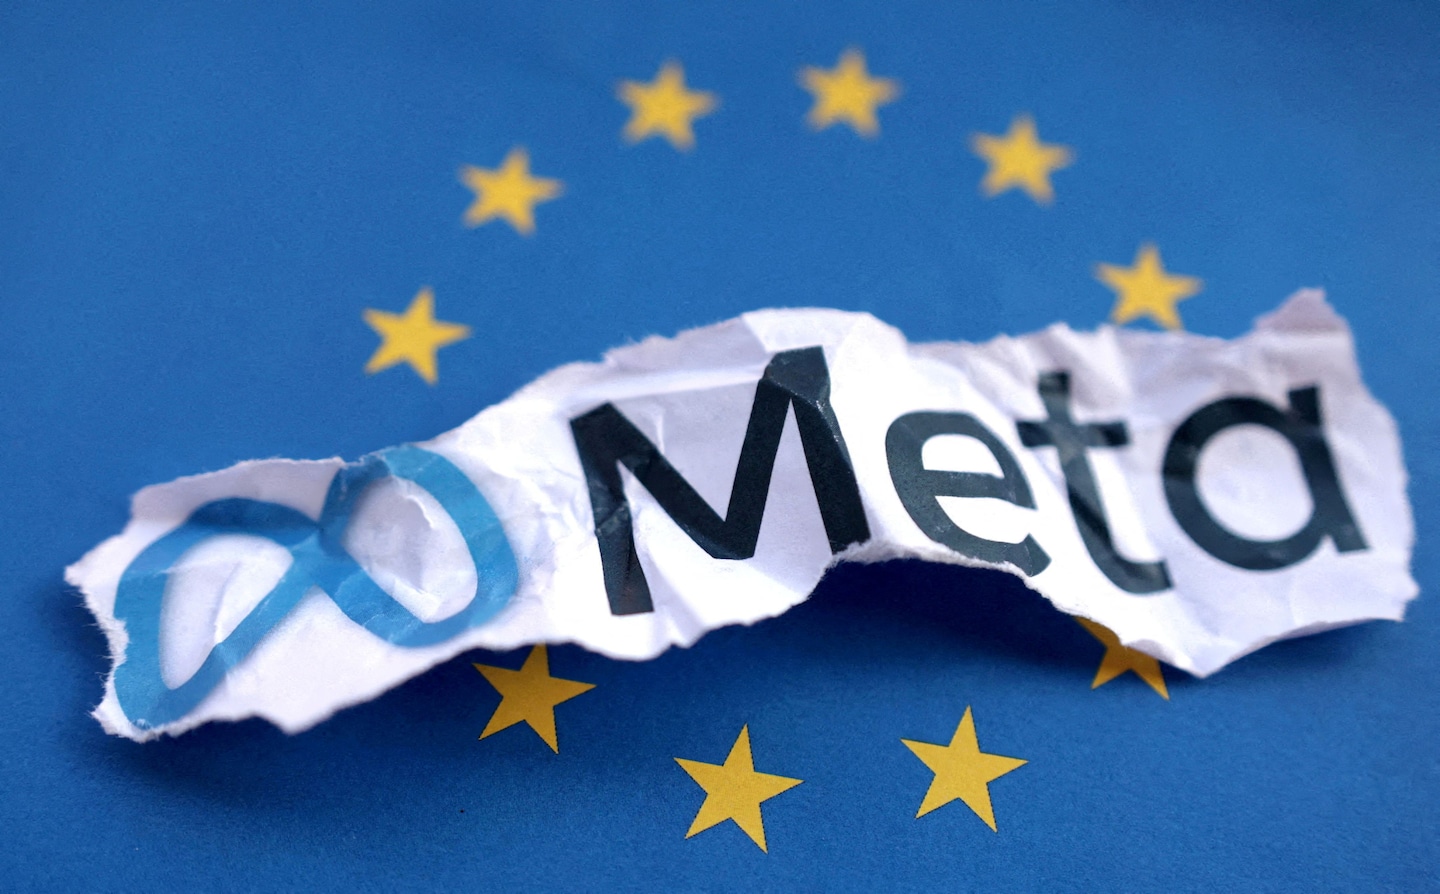 Meta’s ‘pay or consent’ ads violate competition law, EU says